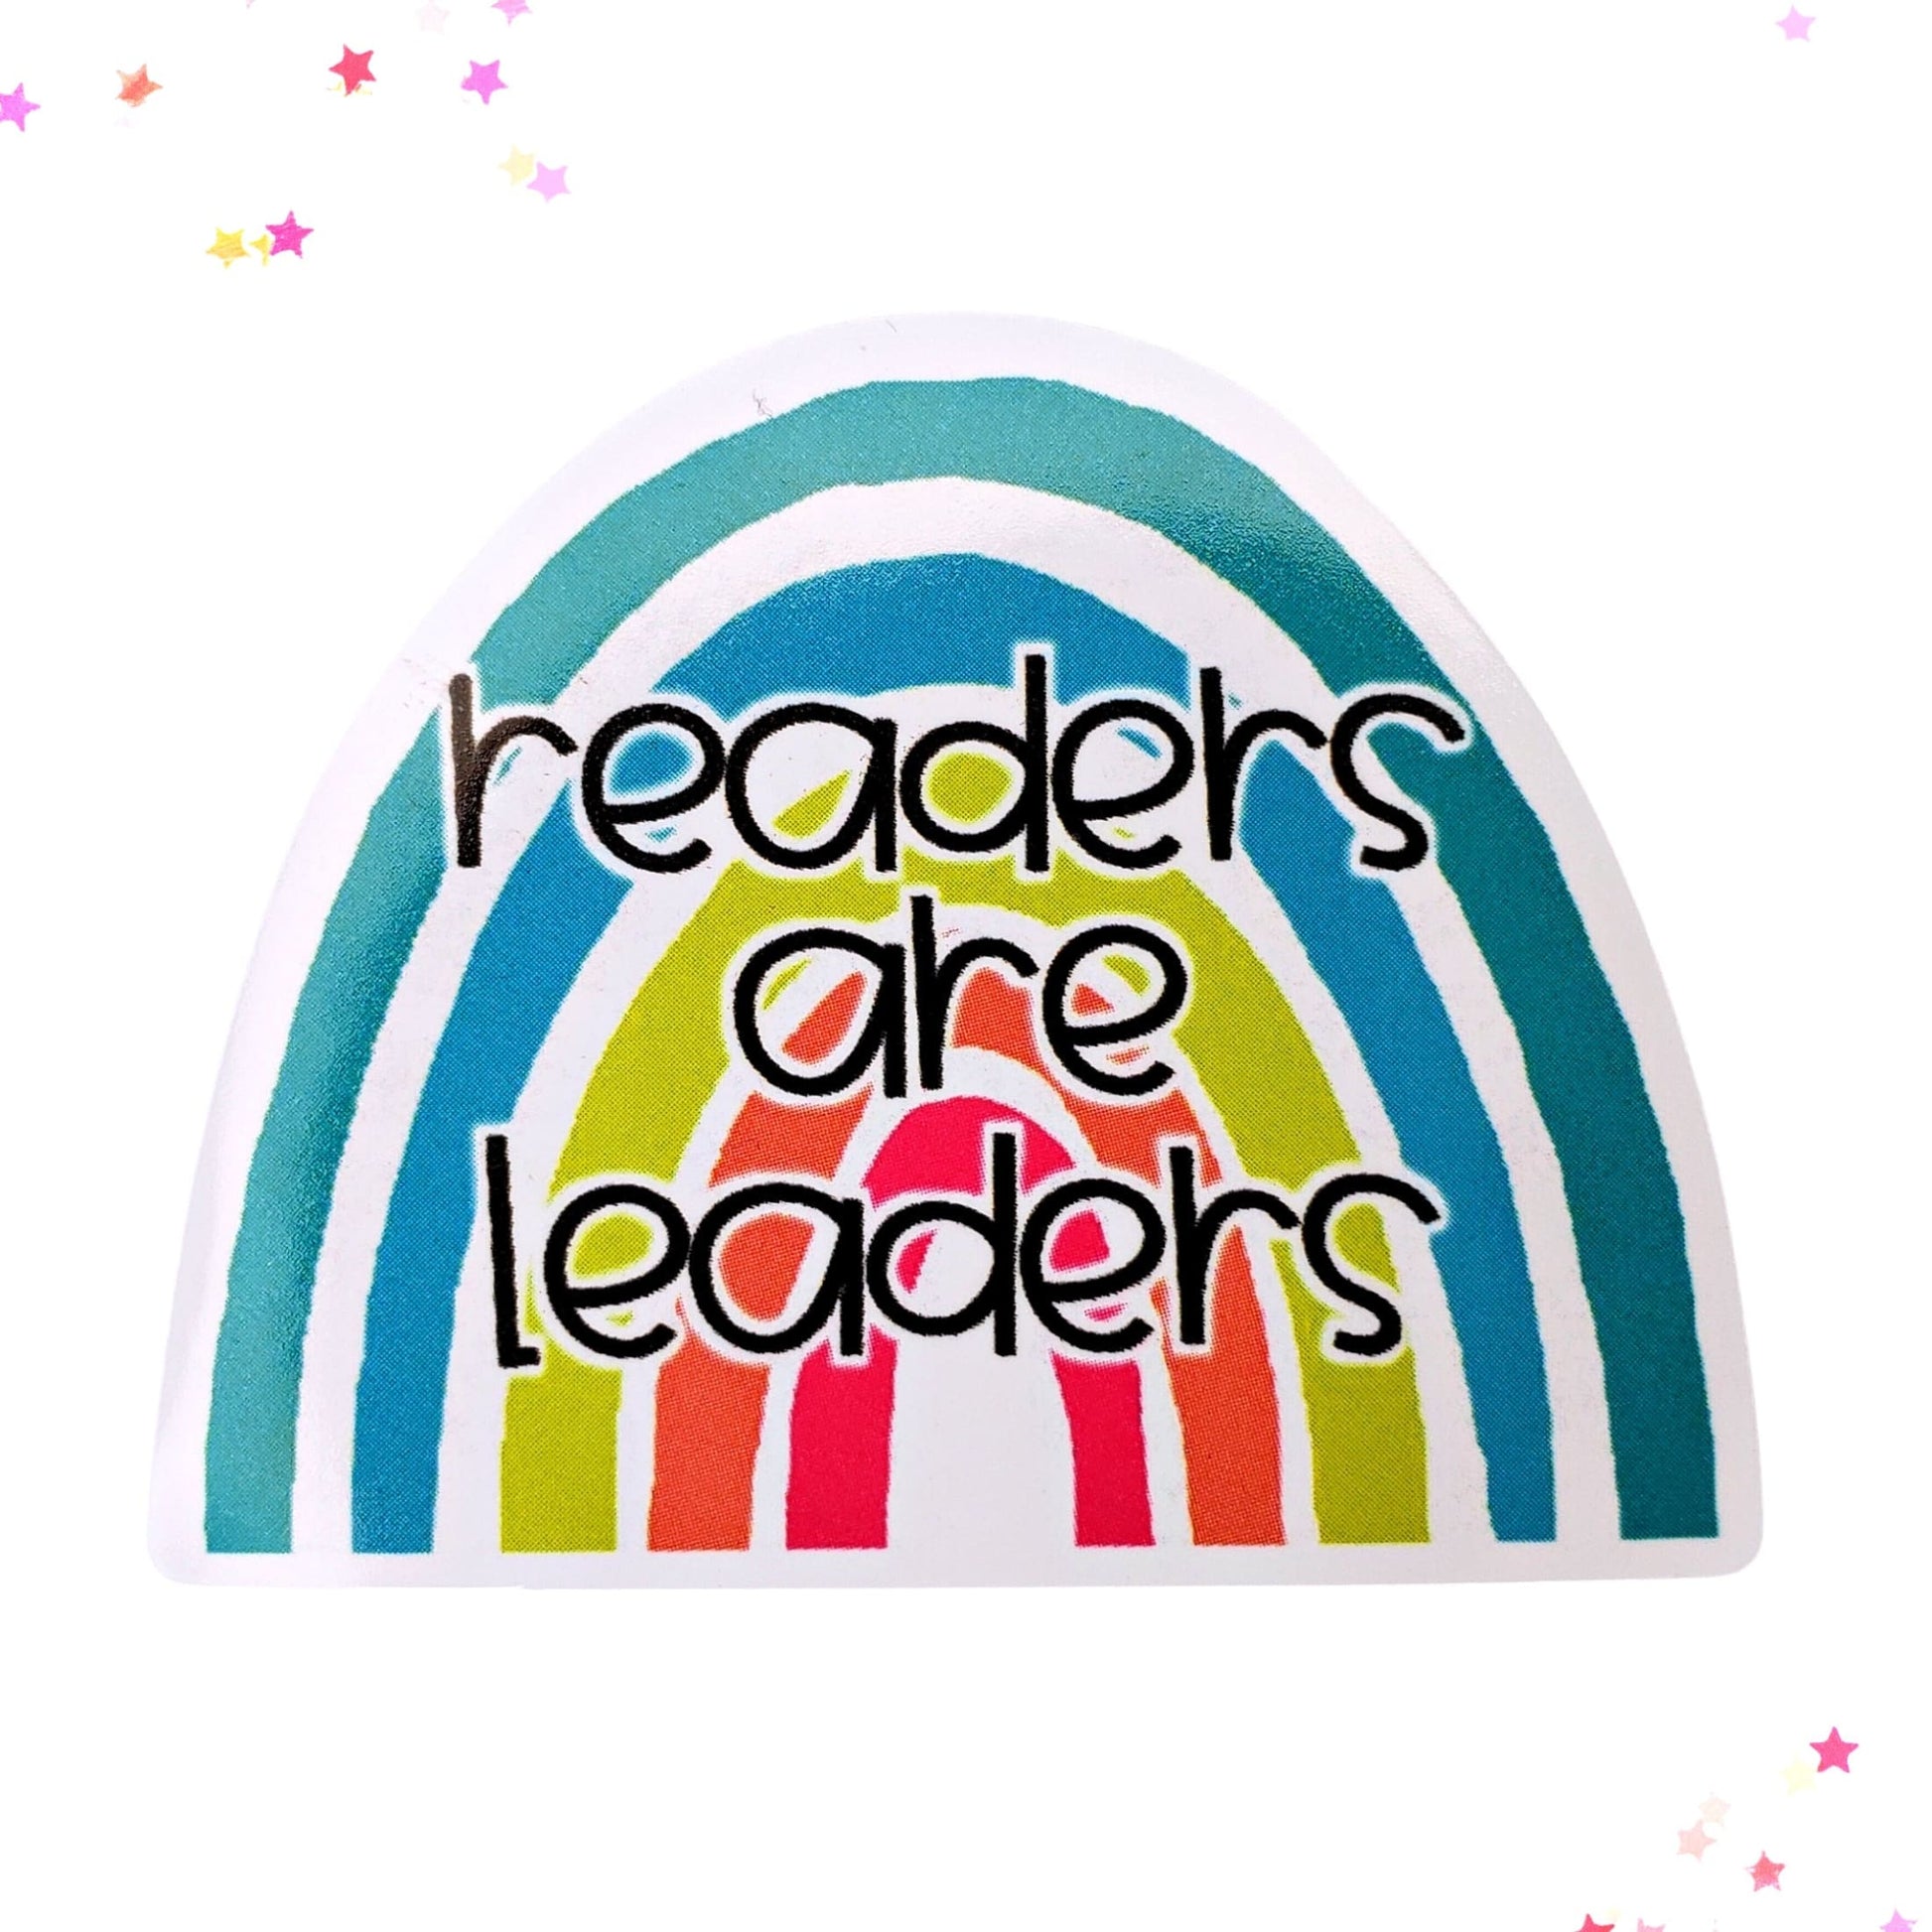 Readers Are Leaders Waterproof Sticker from Confetti Kitty, Only 1.00